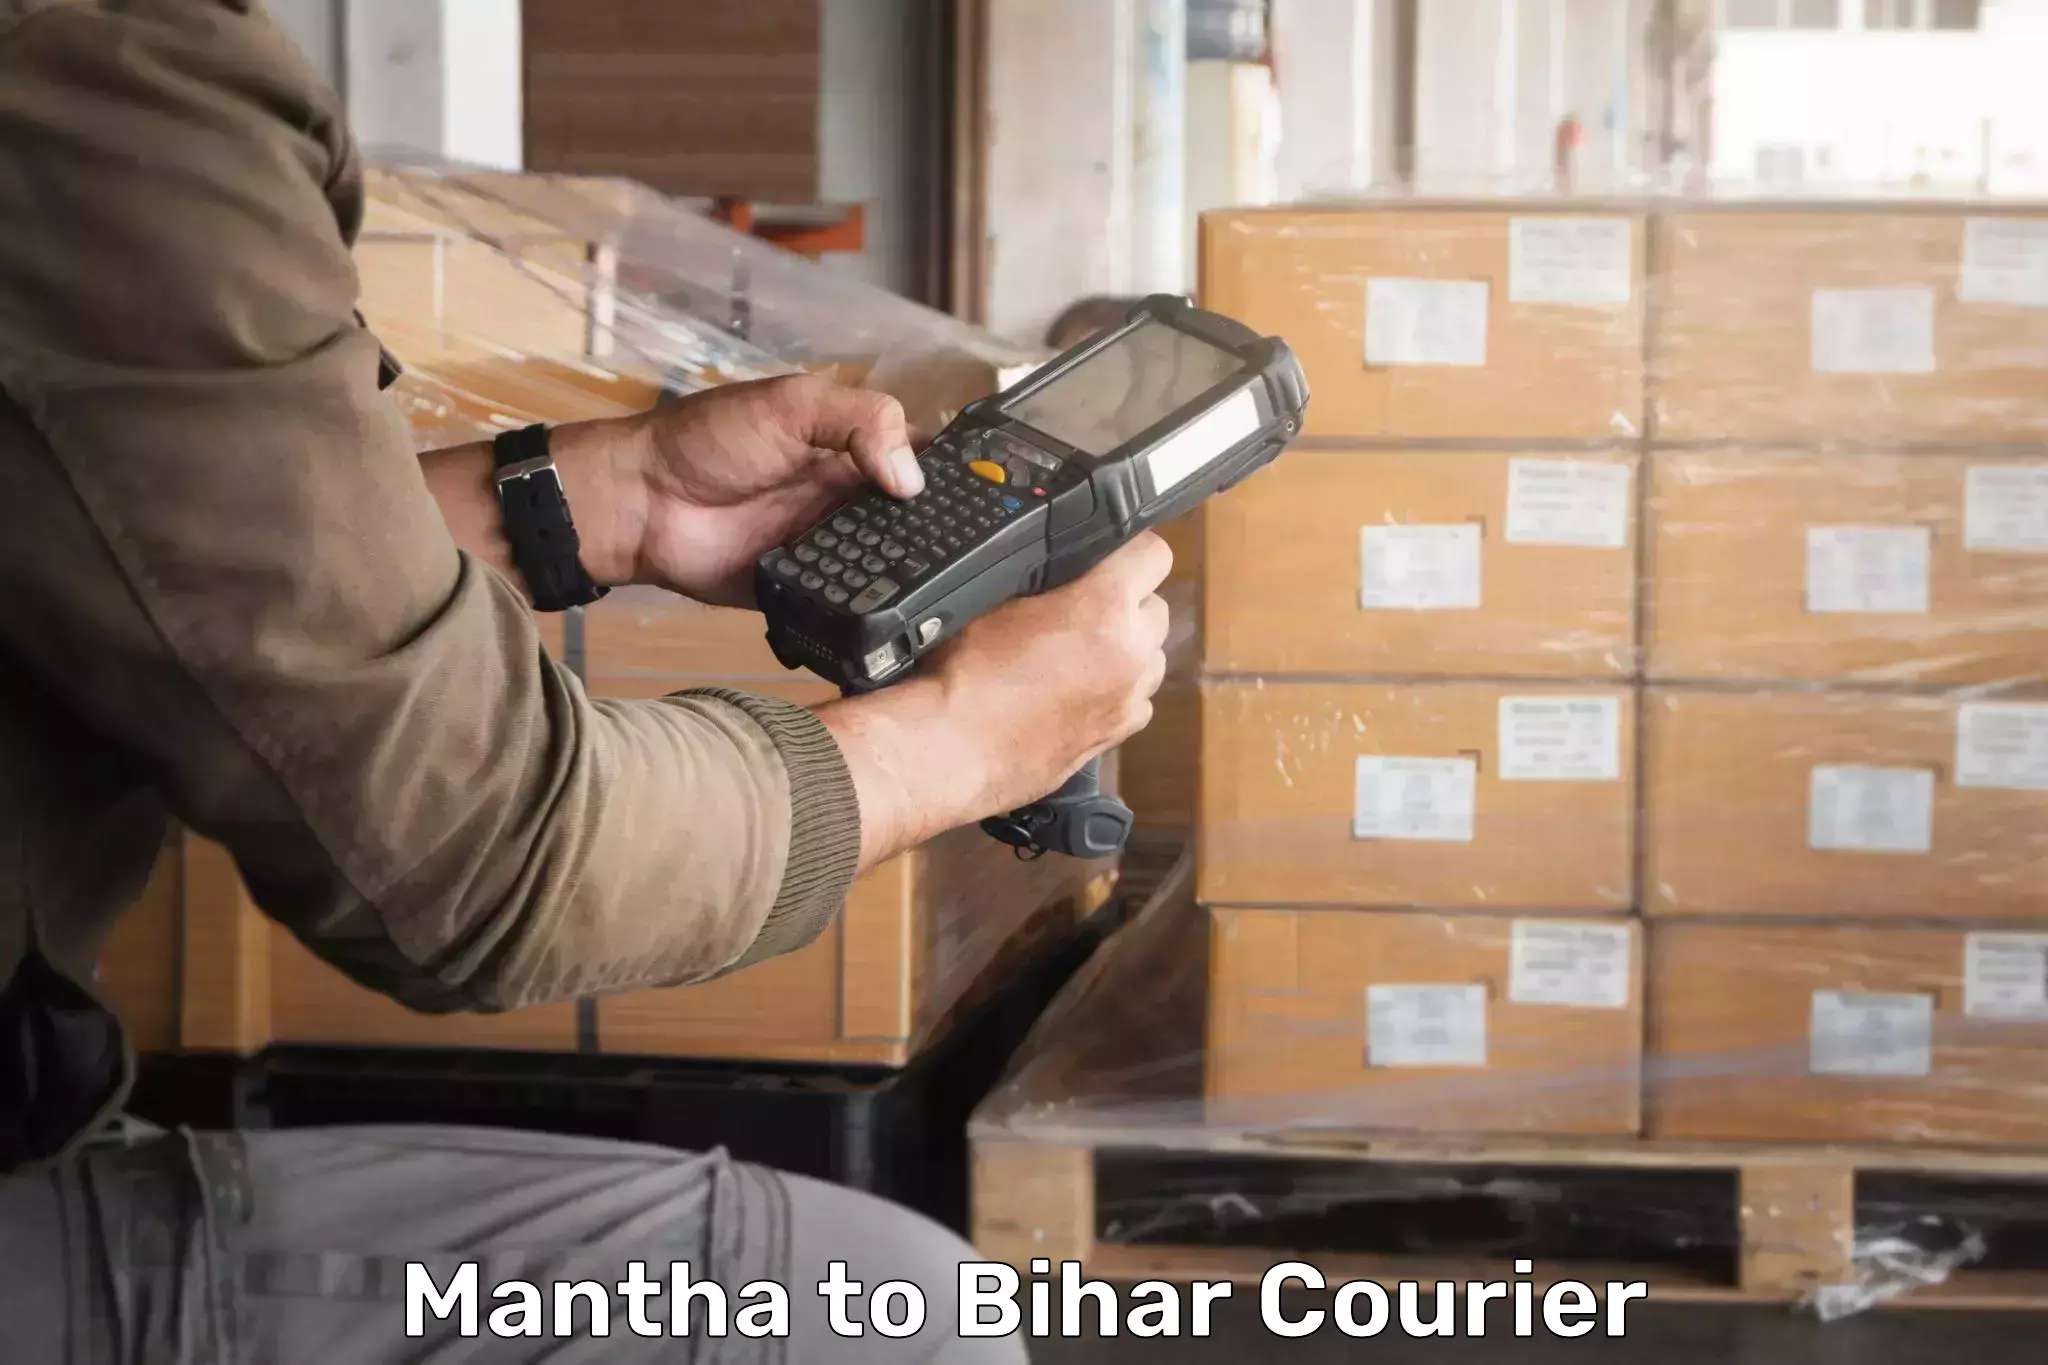 Courier rate comparison Mantha to Piro